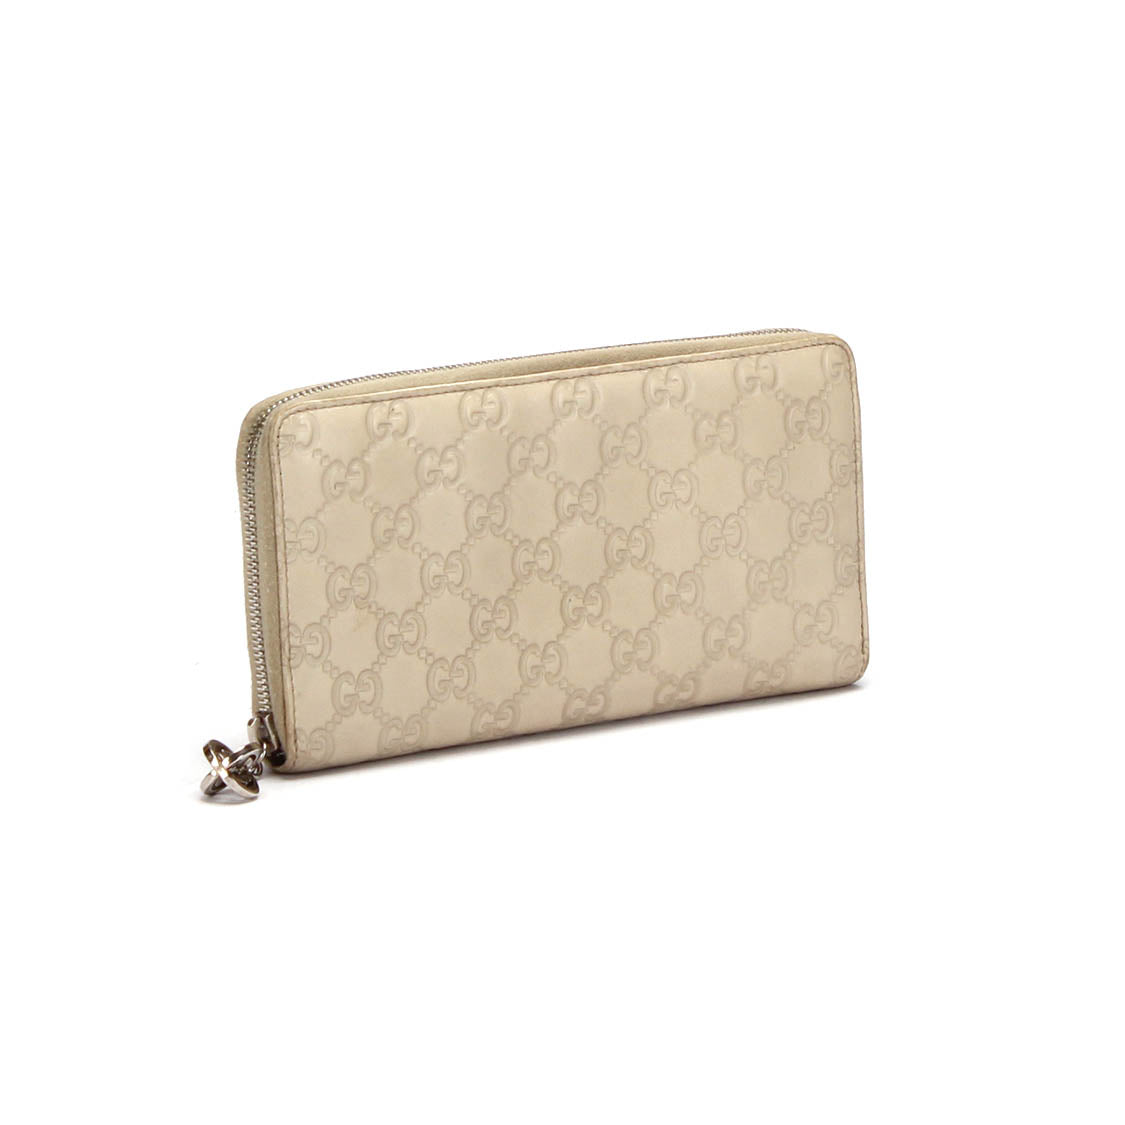 Guccissima Twins Long Wallet